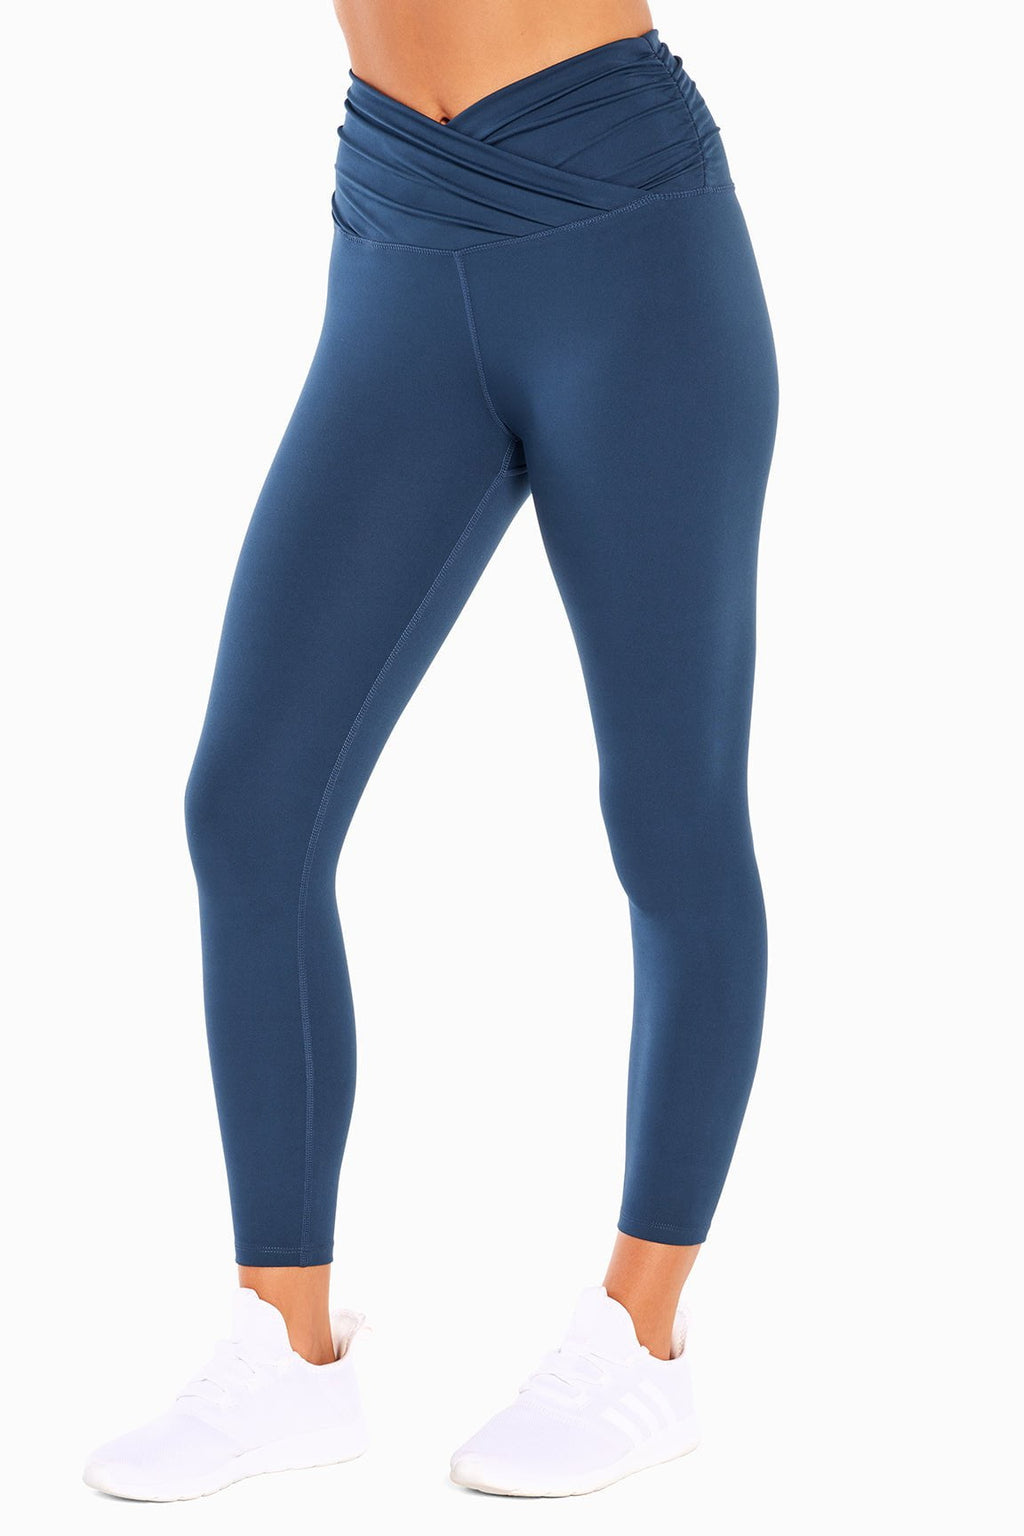 iniber High Waisted Yoga Pants with Pockets for Zambia